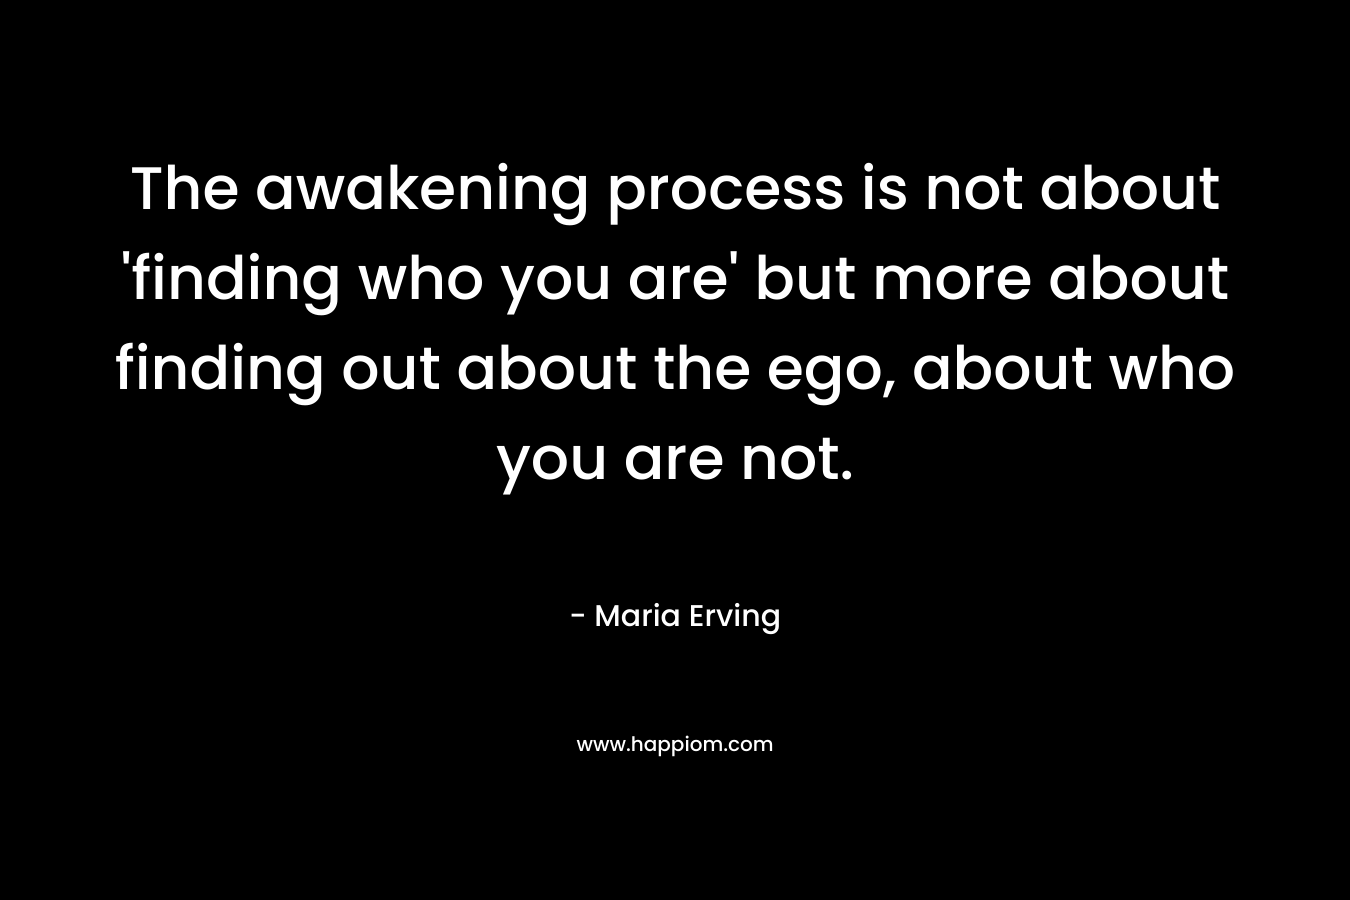 The awakening process is not about ‘finding who you are’ but more about finding out about the ego, about who you are not. – Maria Erving